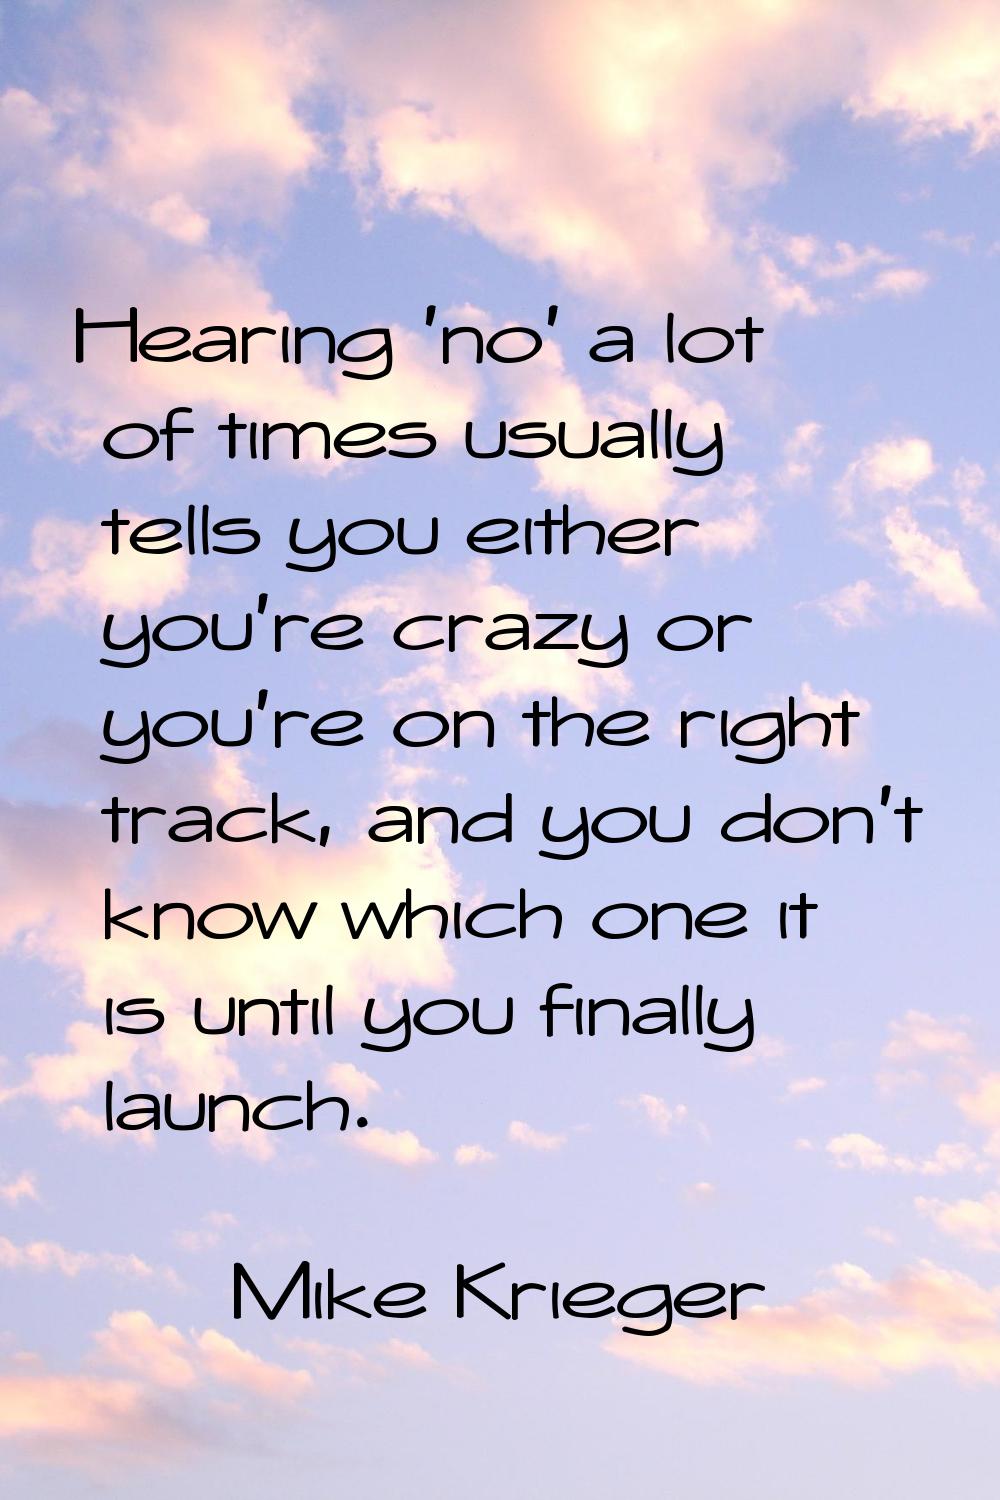 Hearing 'no' a lot of times usually tells you either you're crazy or you're on the right track, and